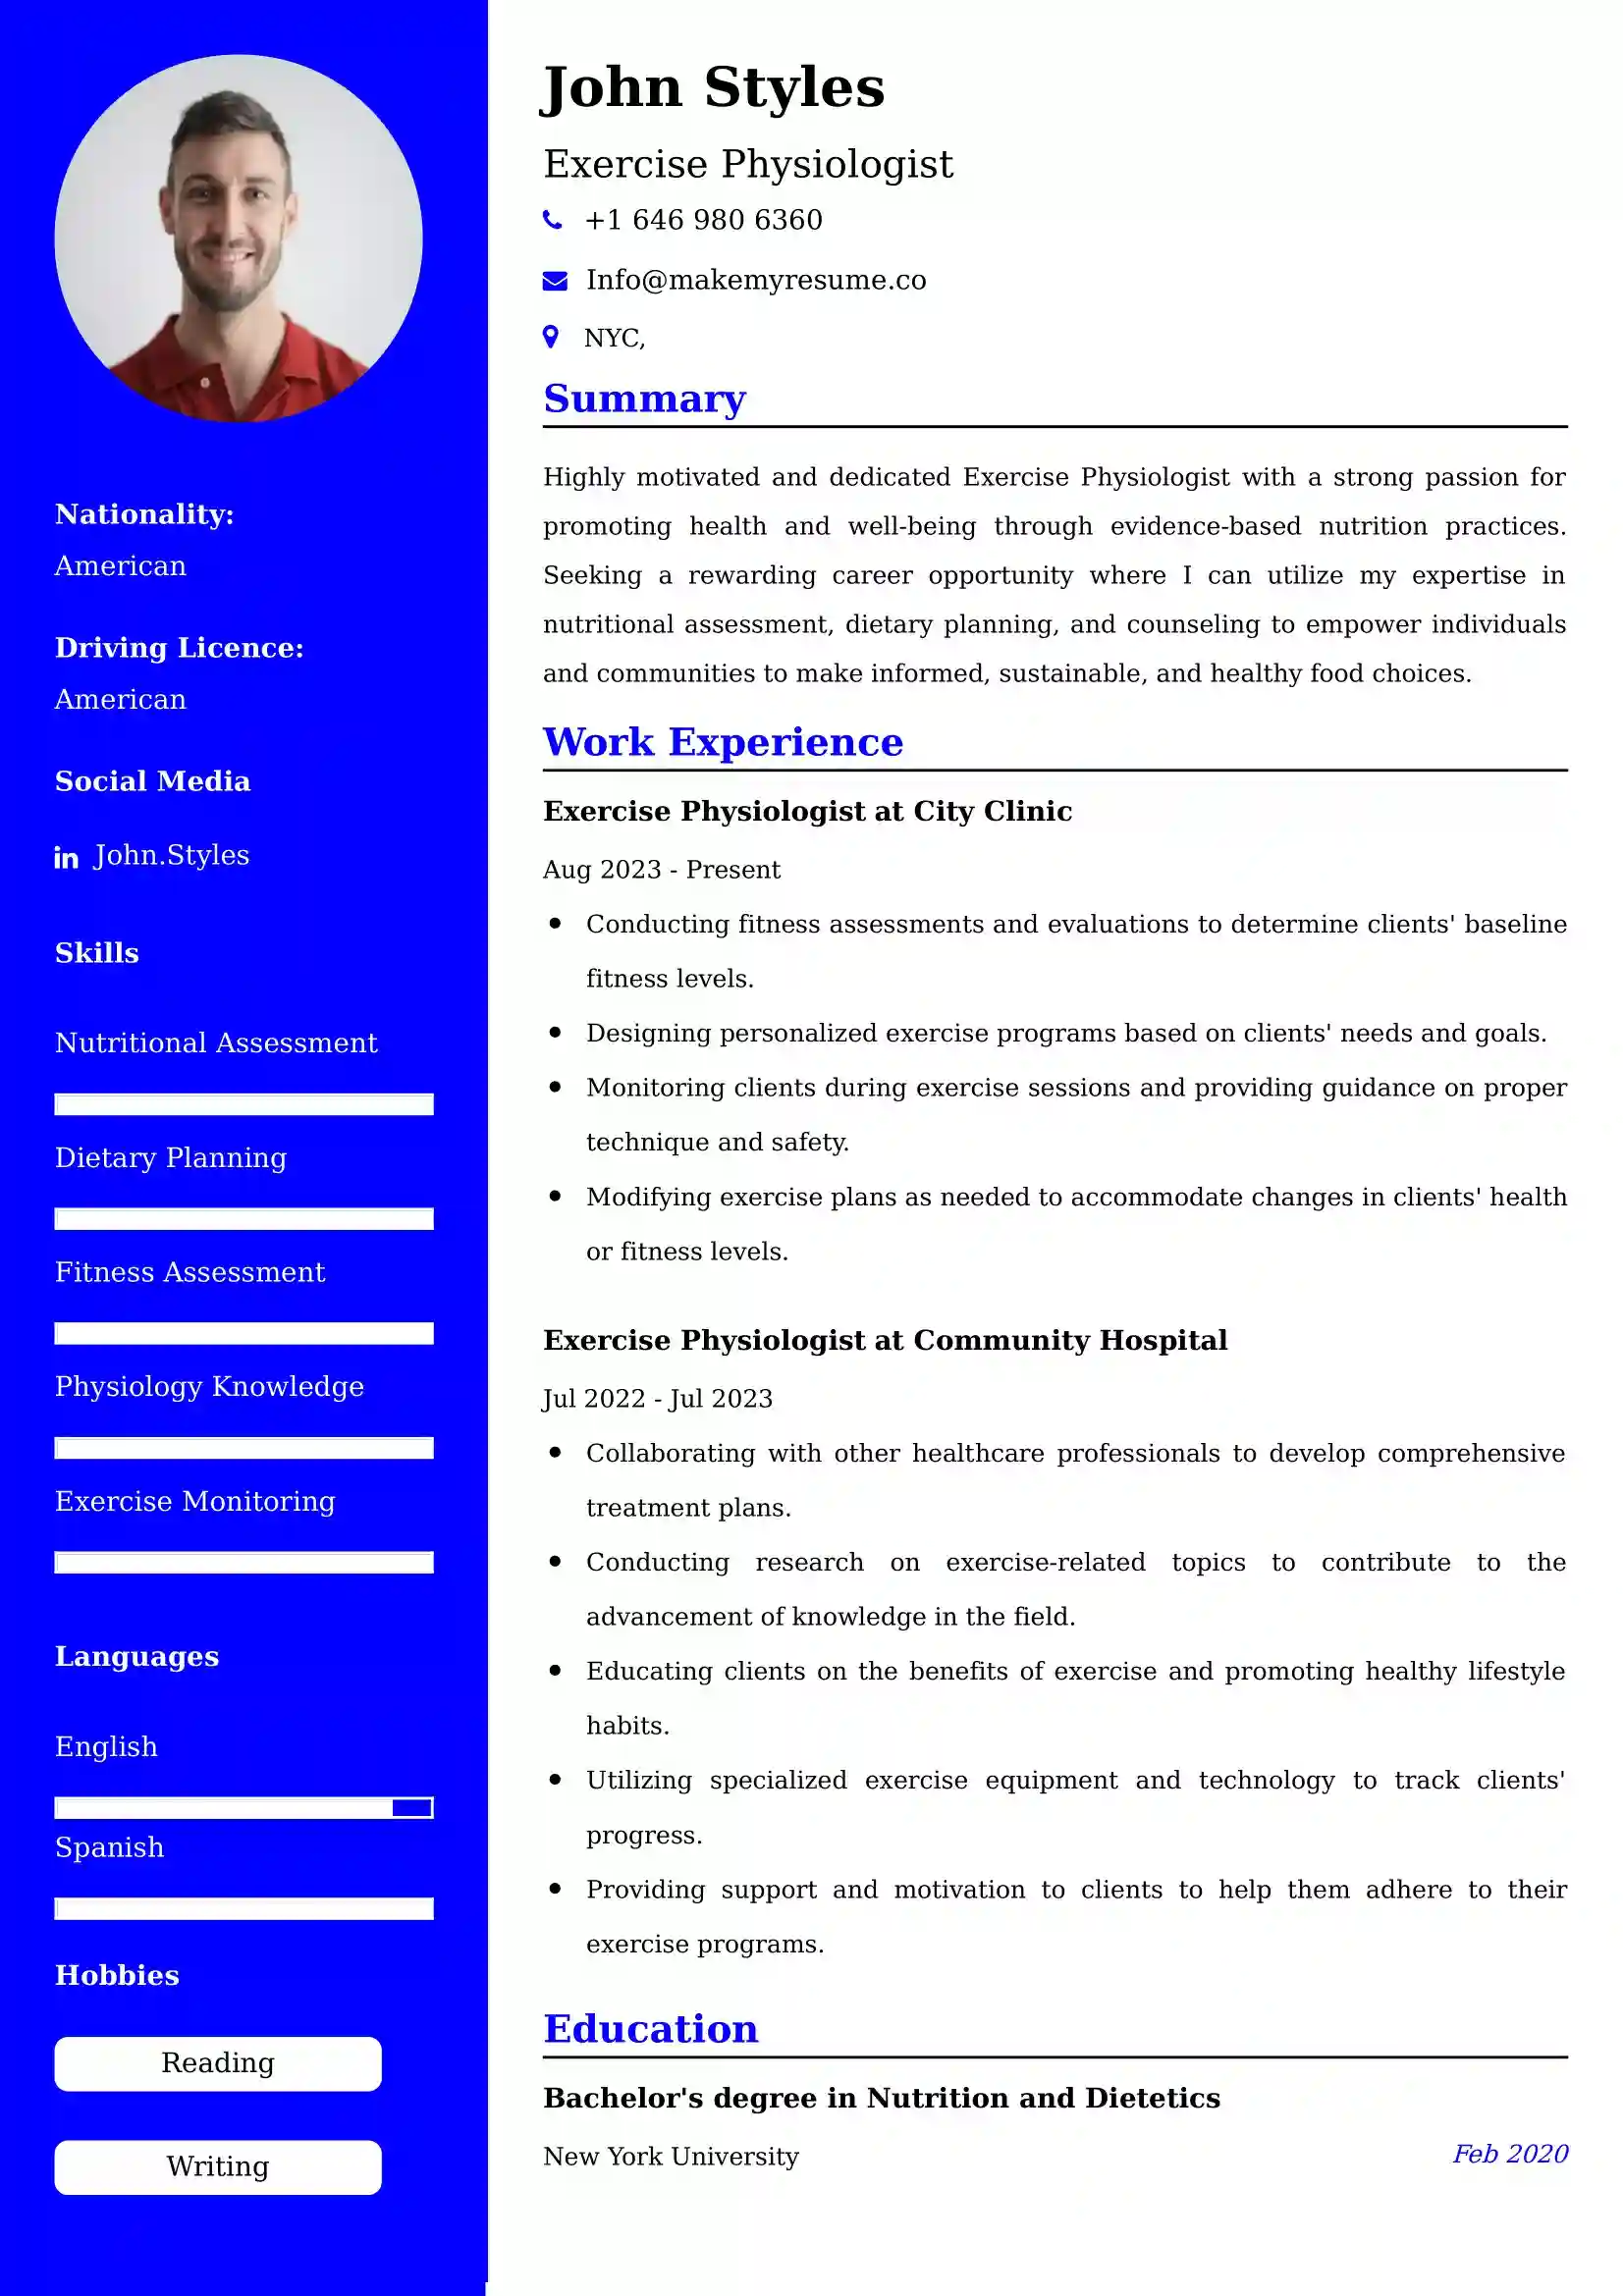 Exercise Physiologist Resume Examples India